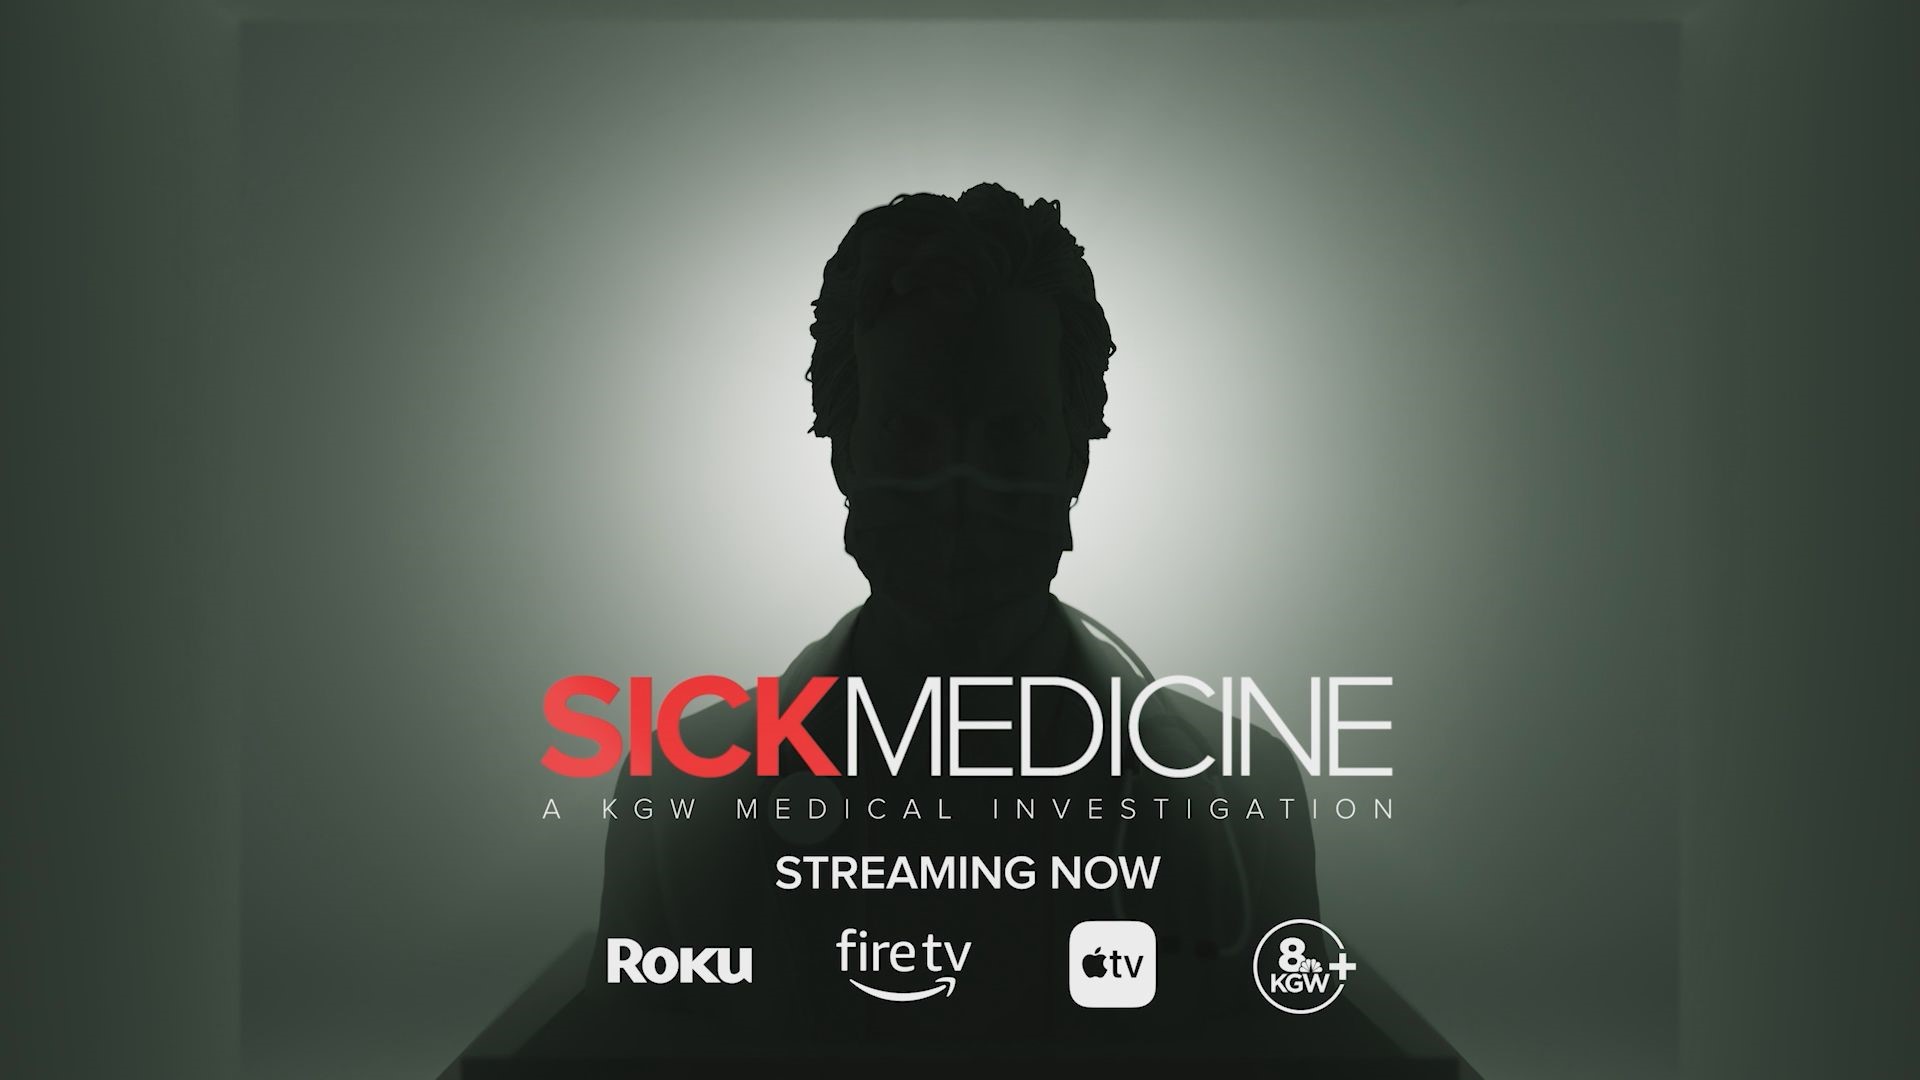 The new investigative documentary examines what happens when state medical boards fail to stop doctors accused of significant wrongdoing from practicing medicine.